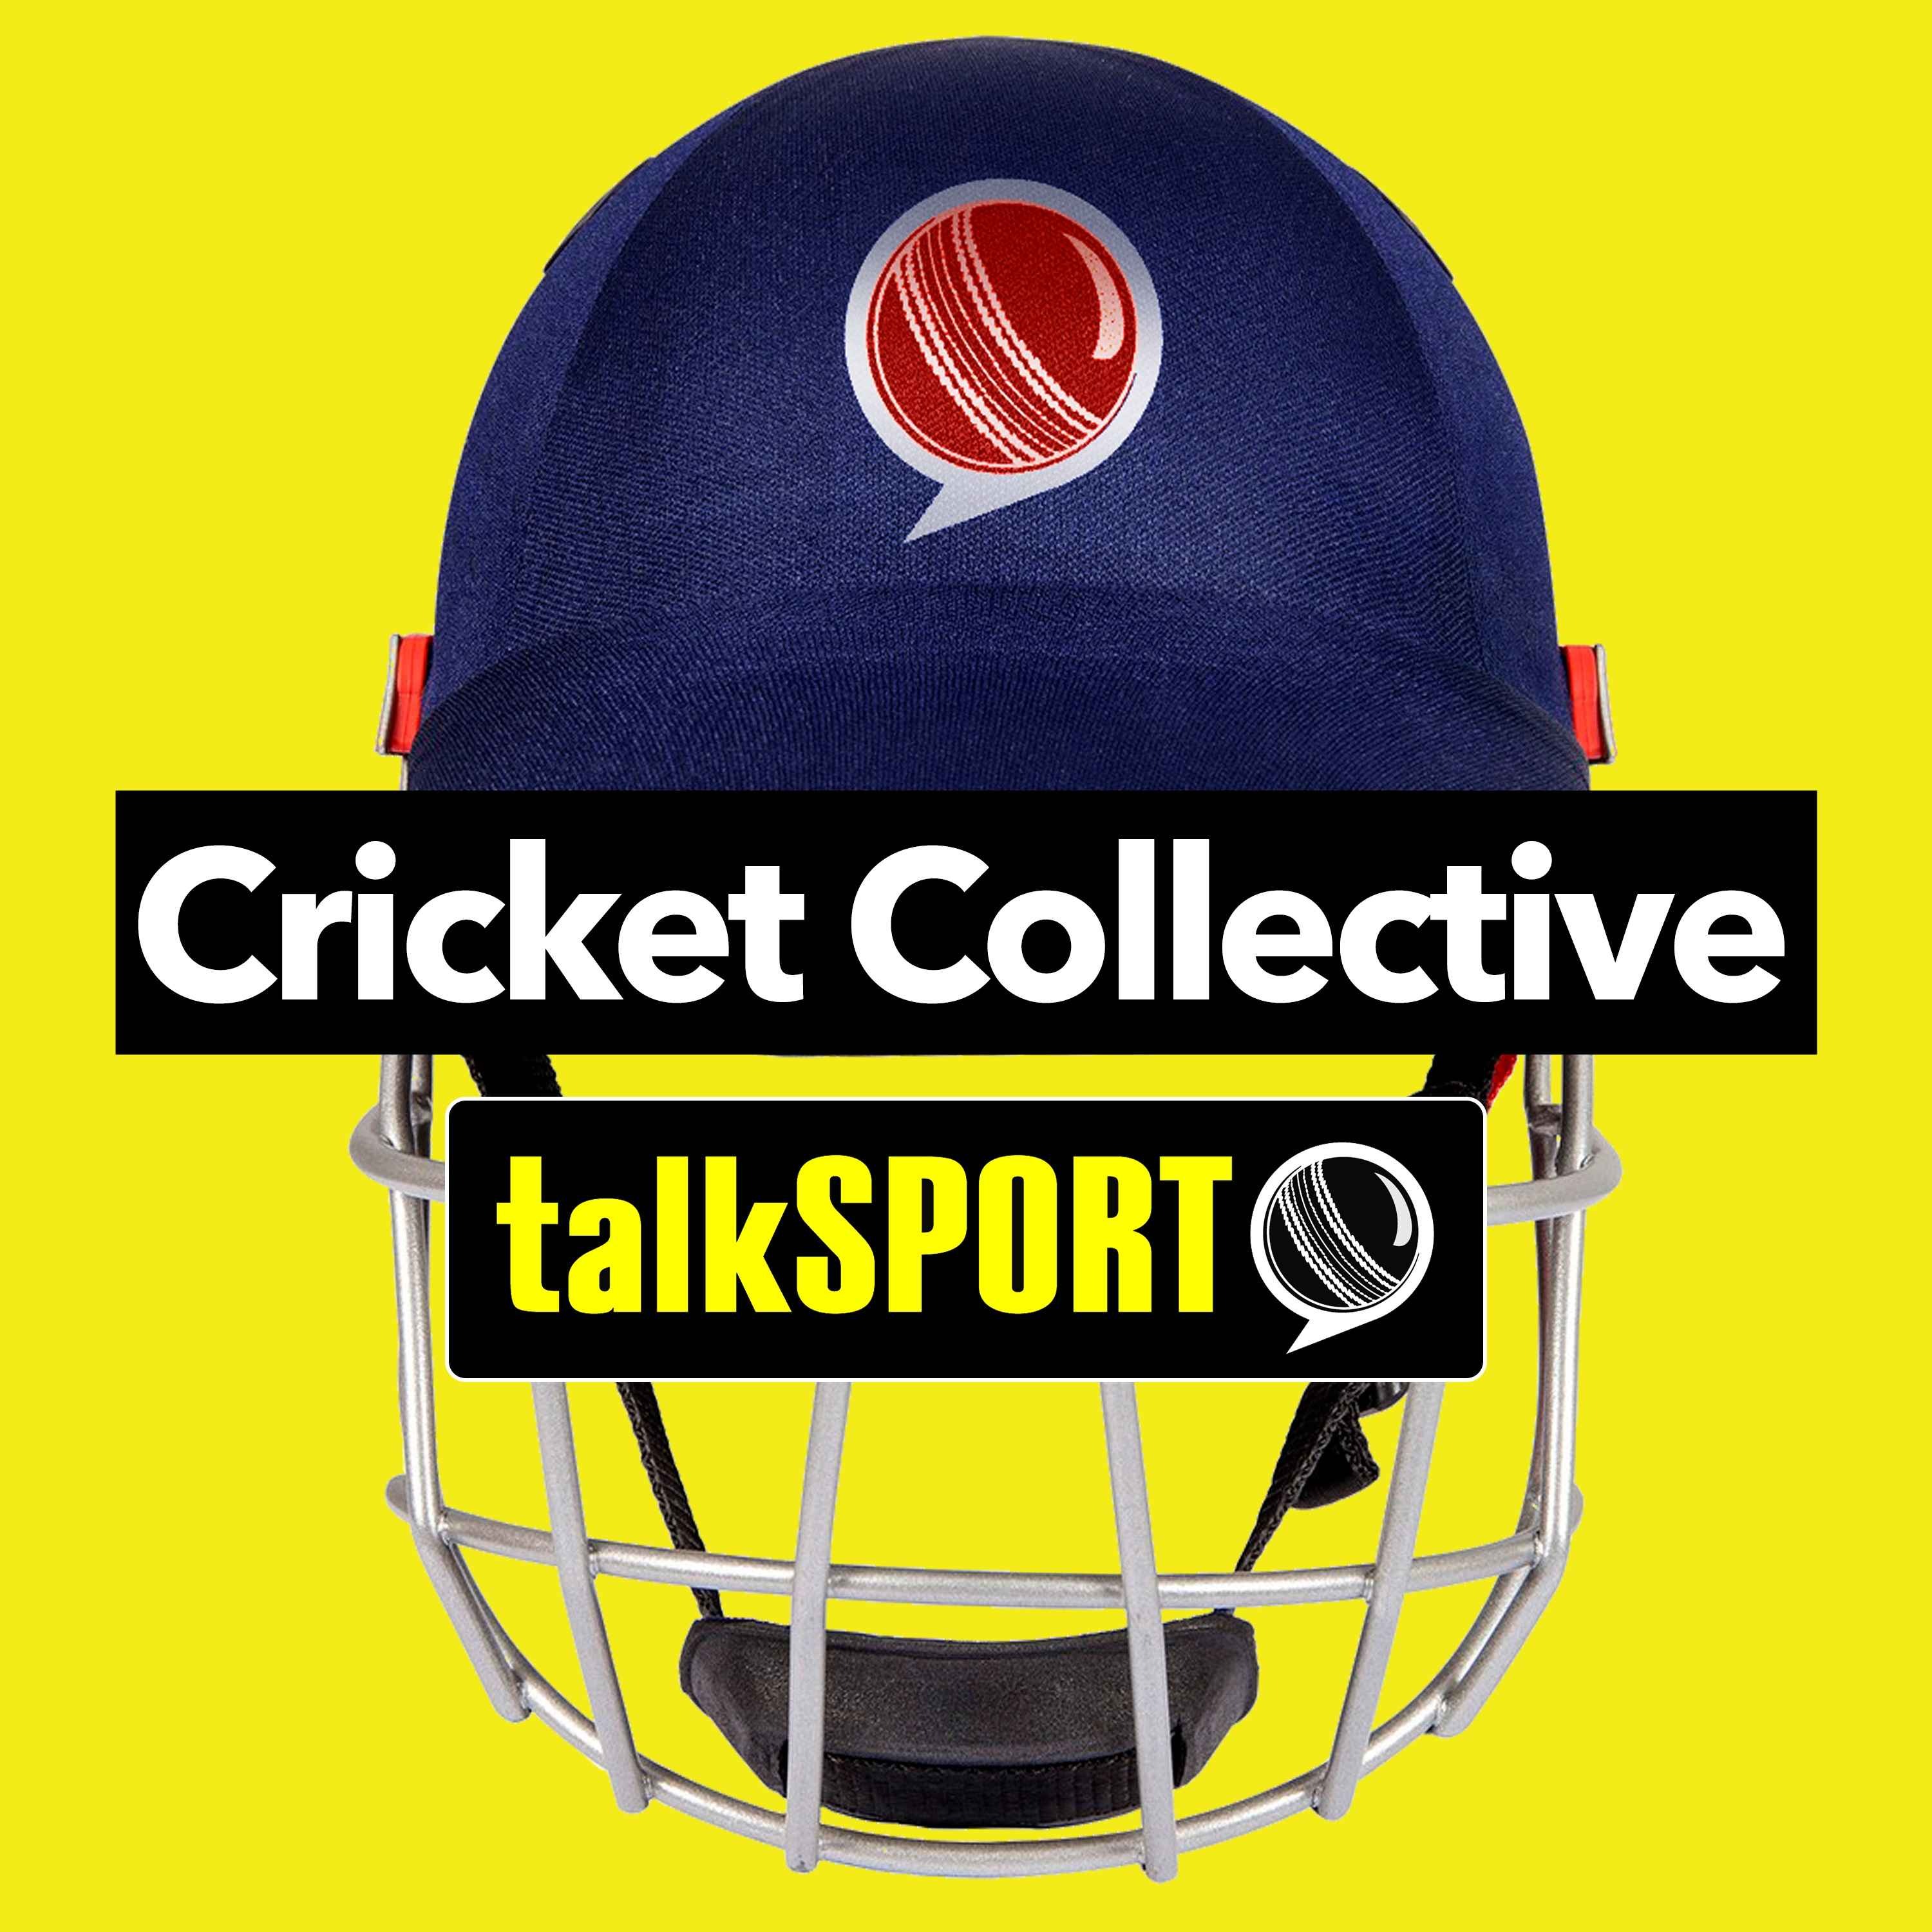 The Cricket Collective - Australia Win A Thriller & Lord's Turns Red For Ruth